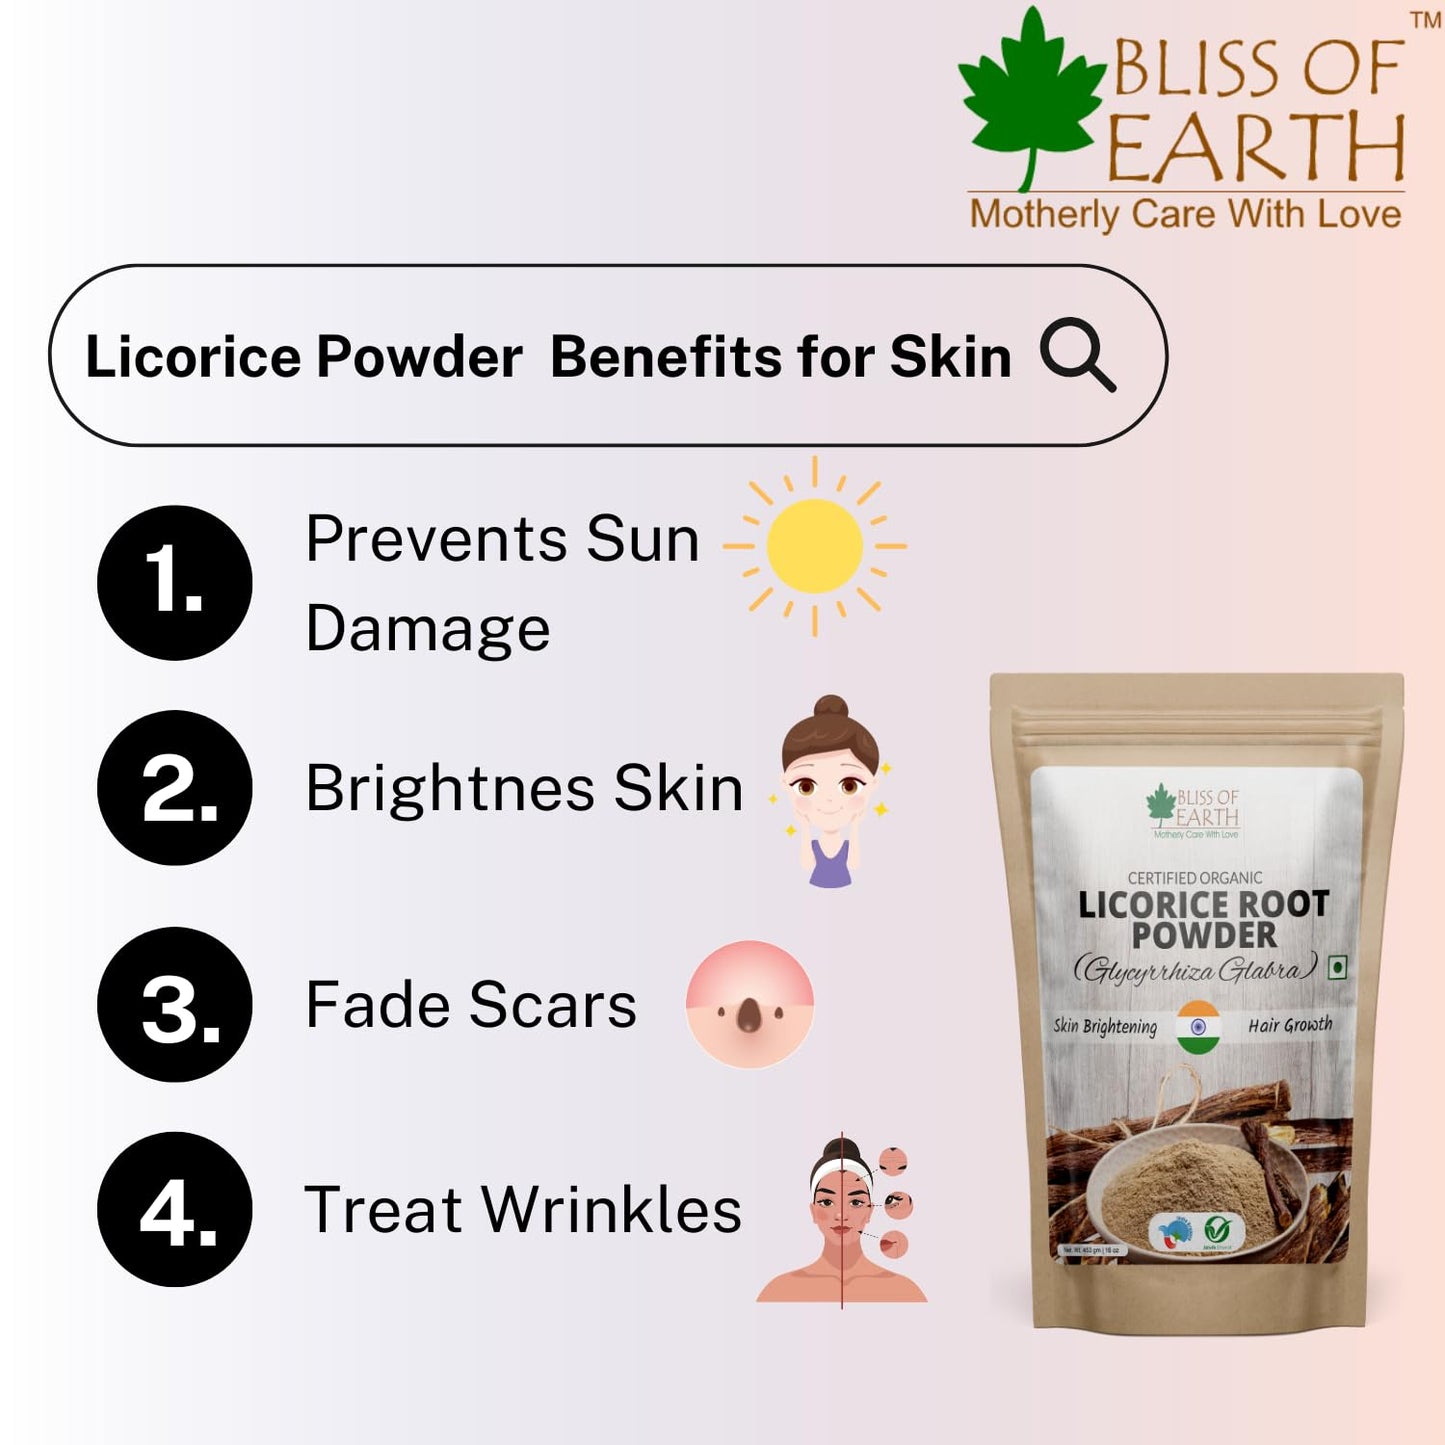 Bliss of Earth Licorice Root Powder